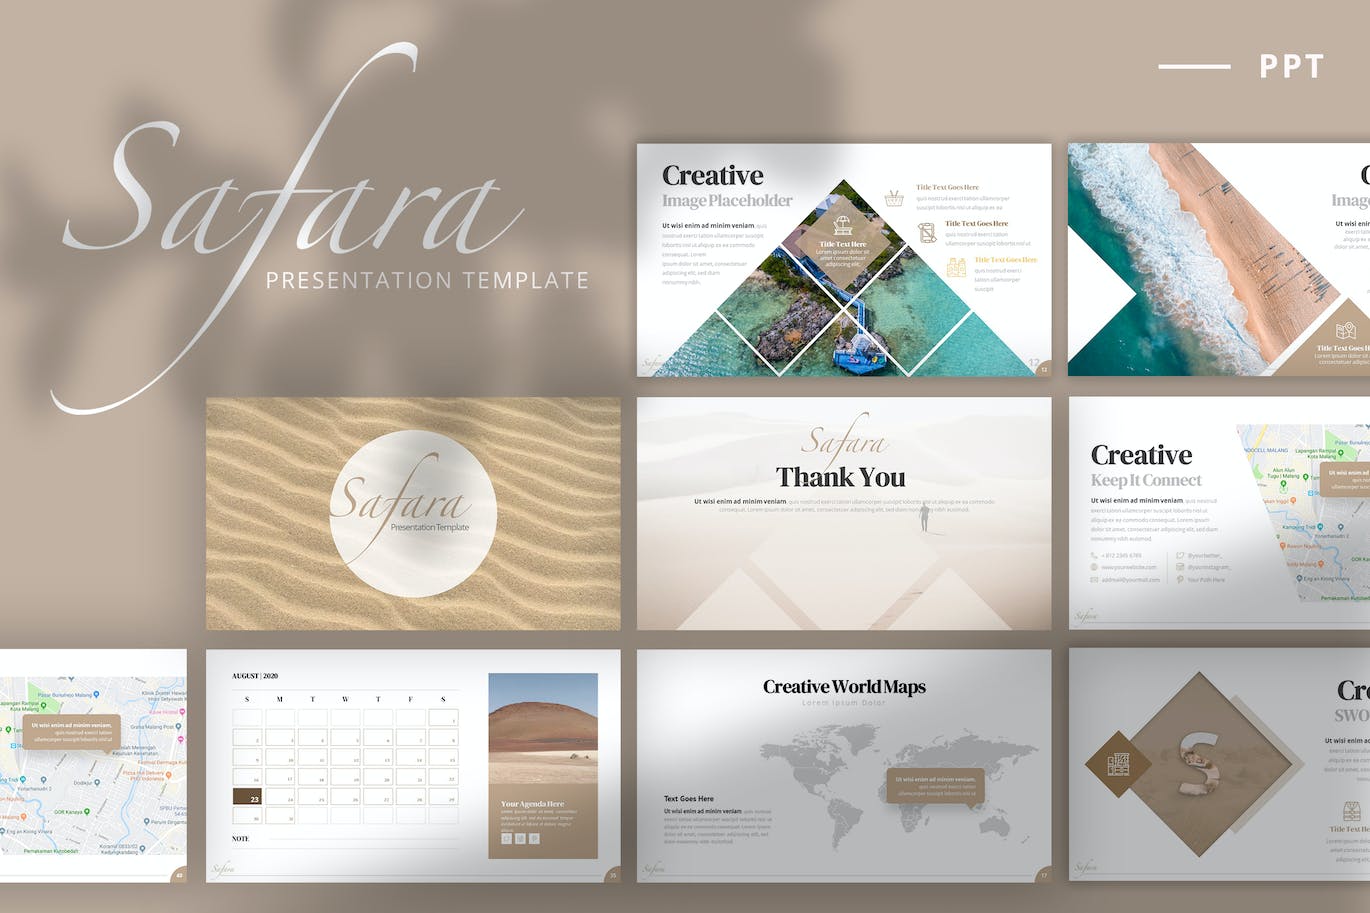 Cover with images of beautiful calendar presentation template slides.